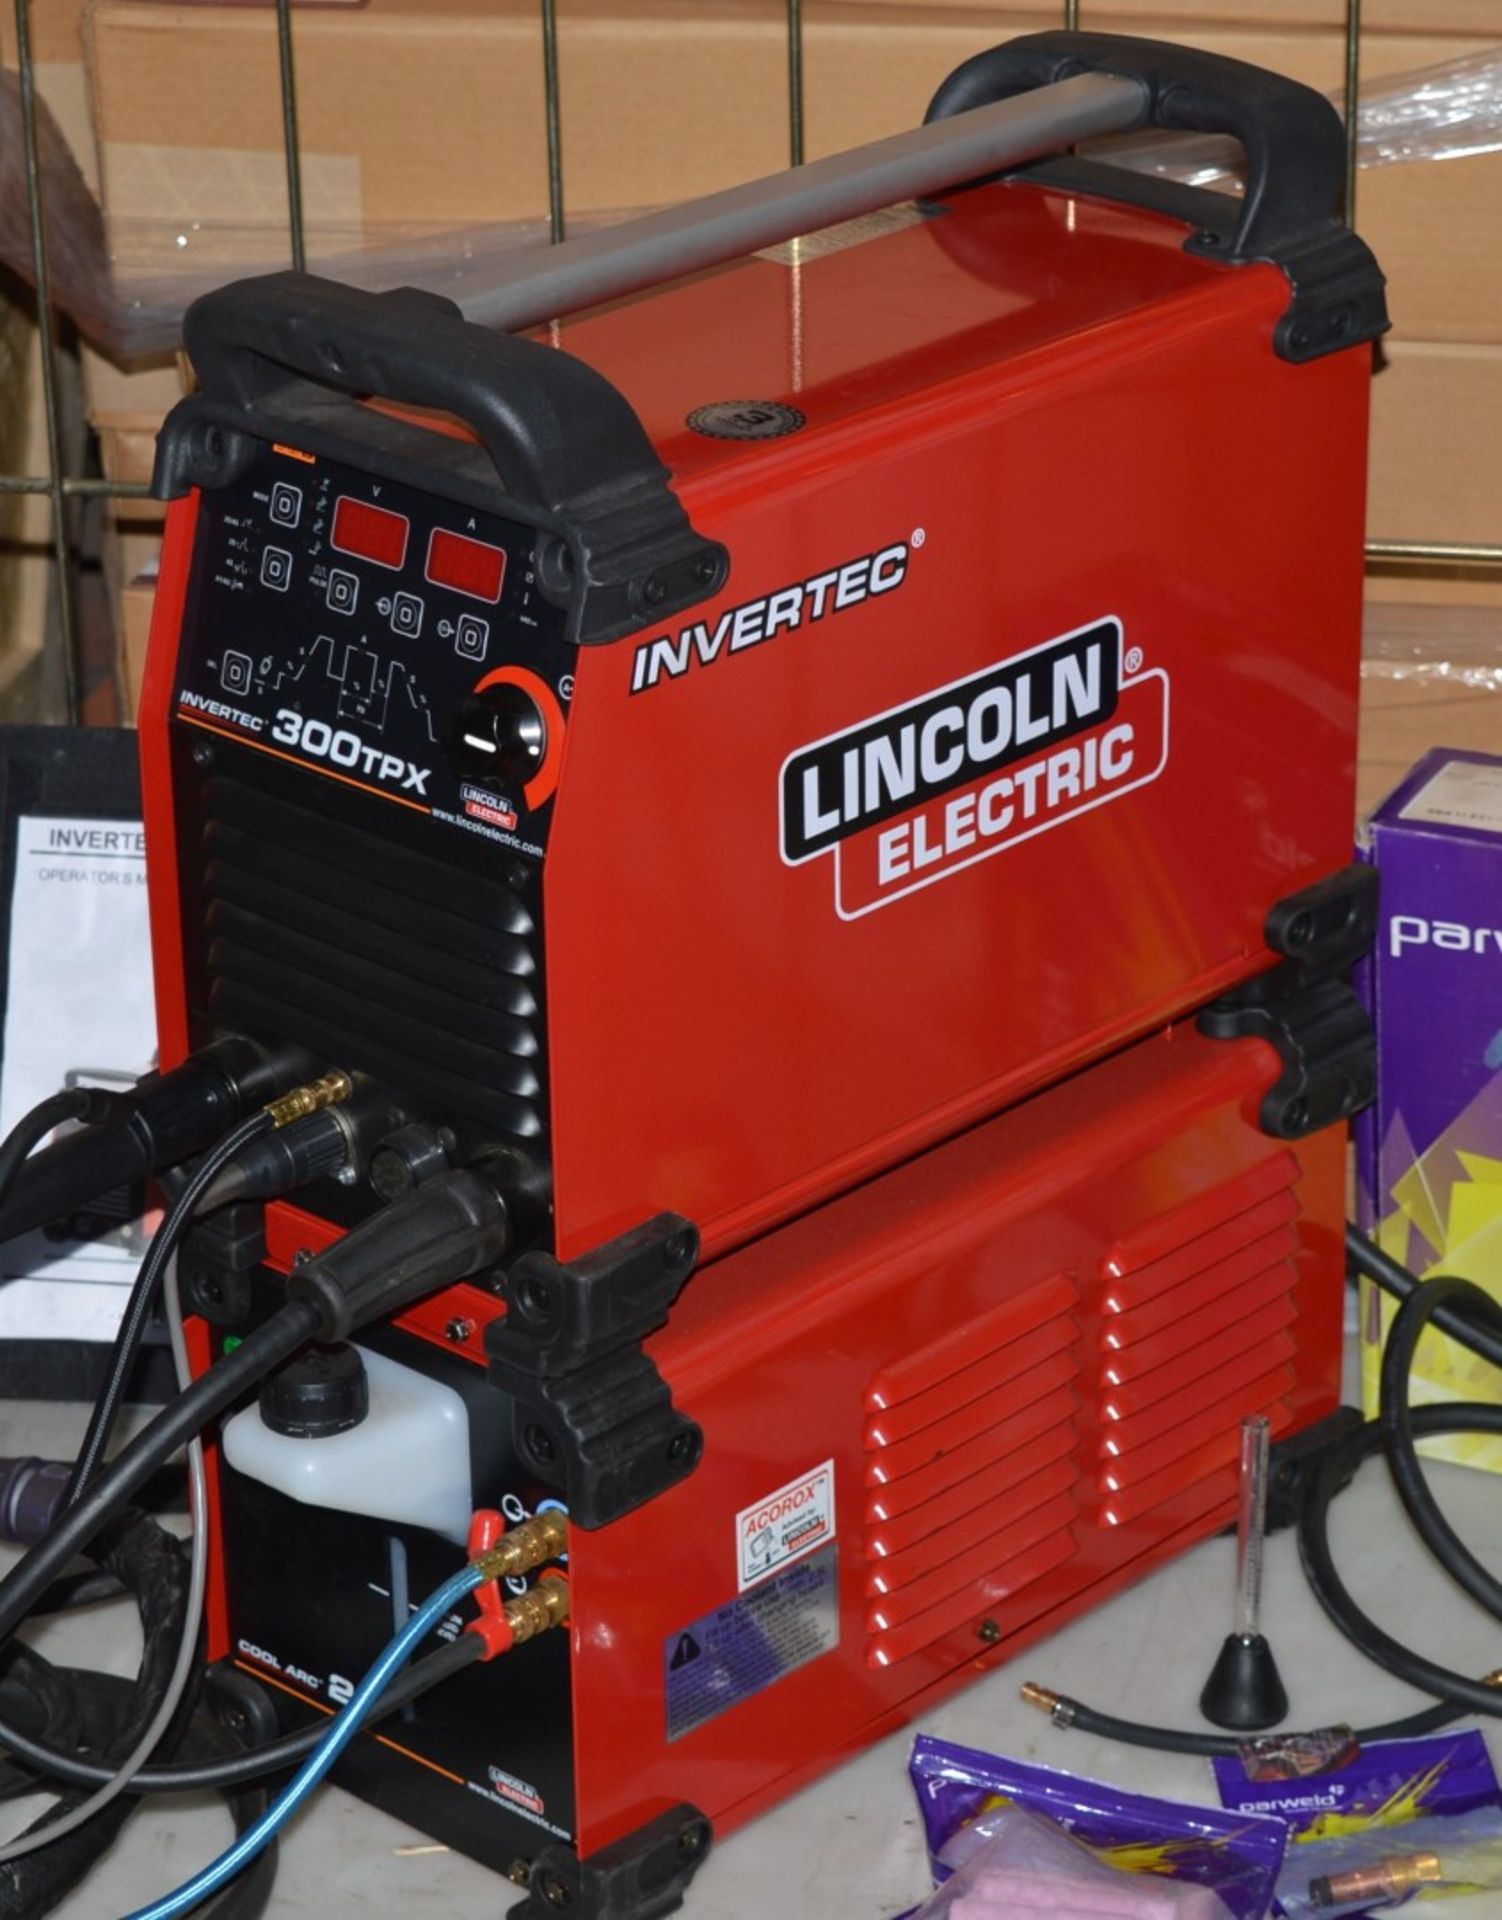 1 x Lincoln Electric Invertec 300 tpx Tig Welder With Cool Arc 21 Water Cooler and Accessories -